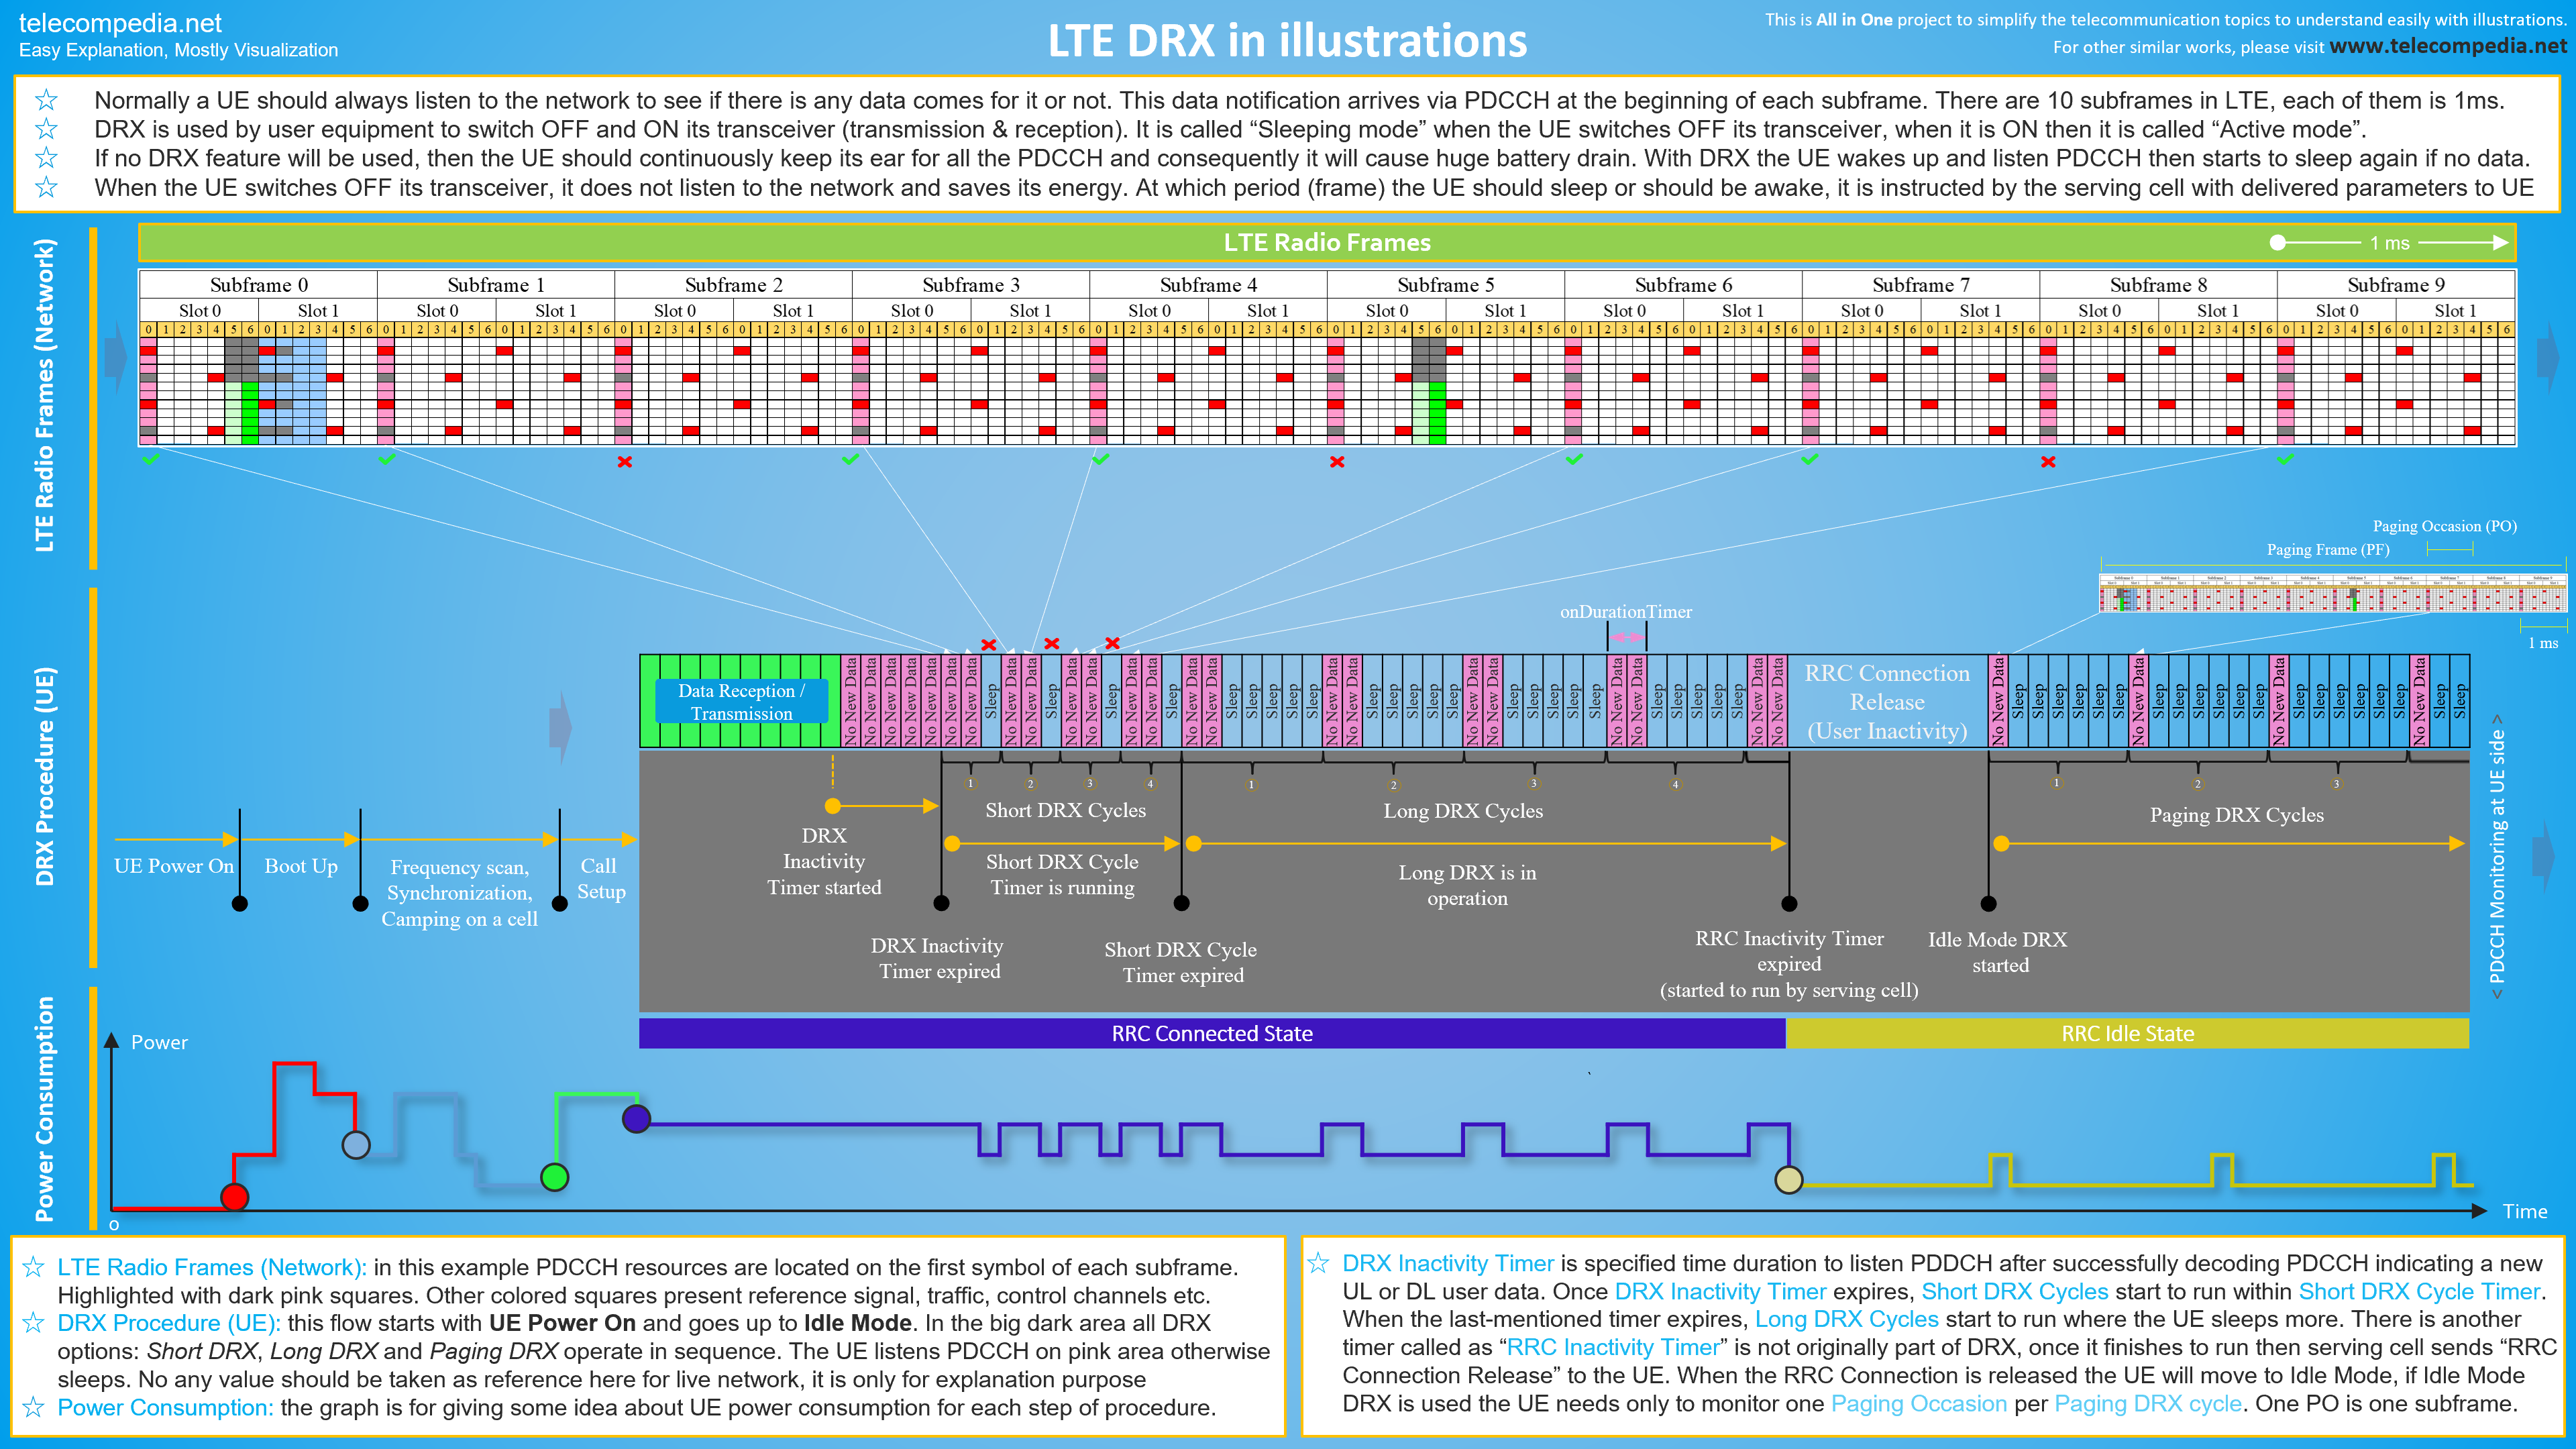 LTE DRX in illustrations